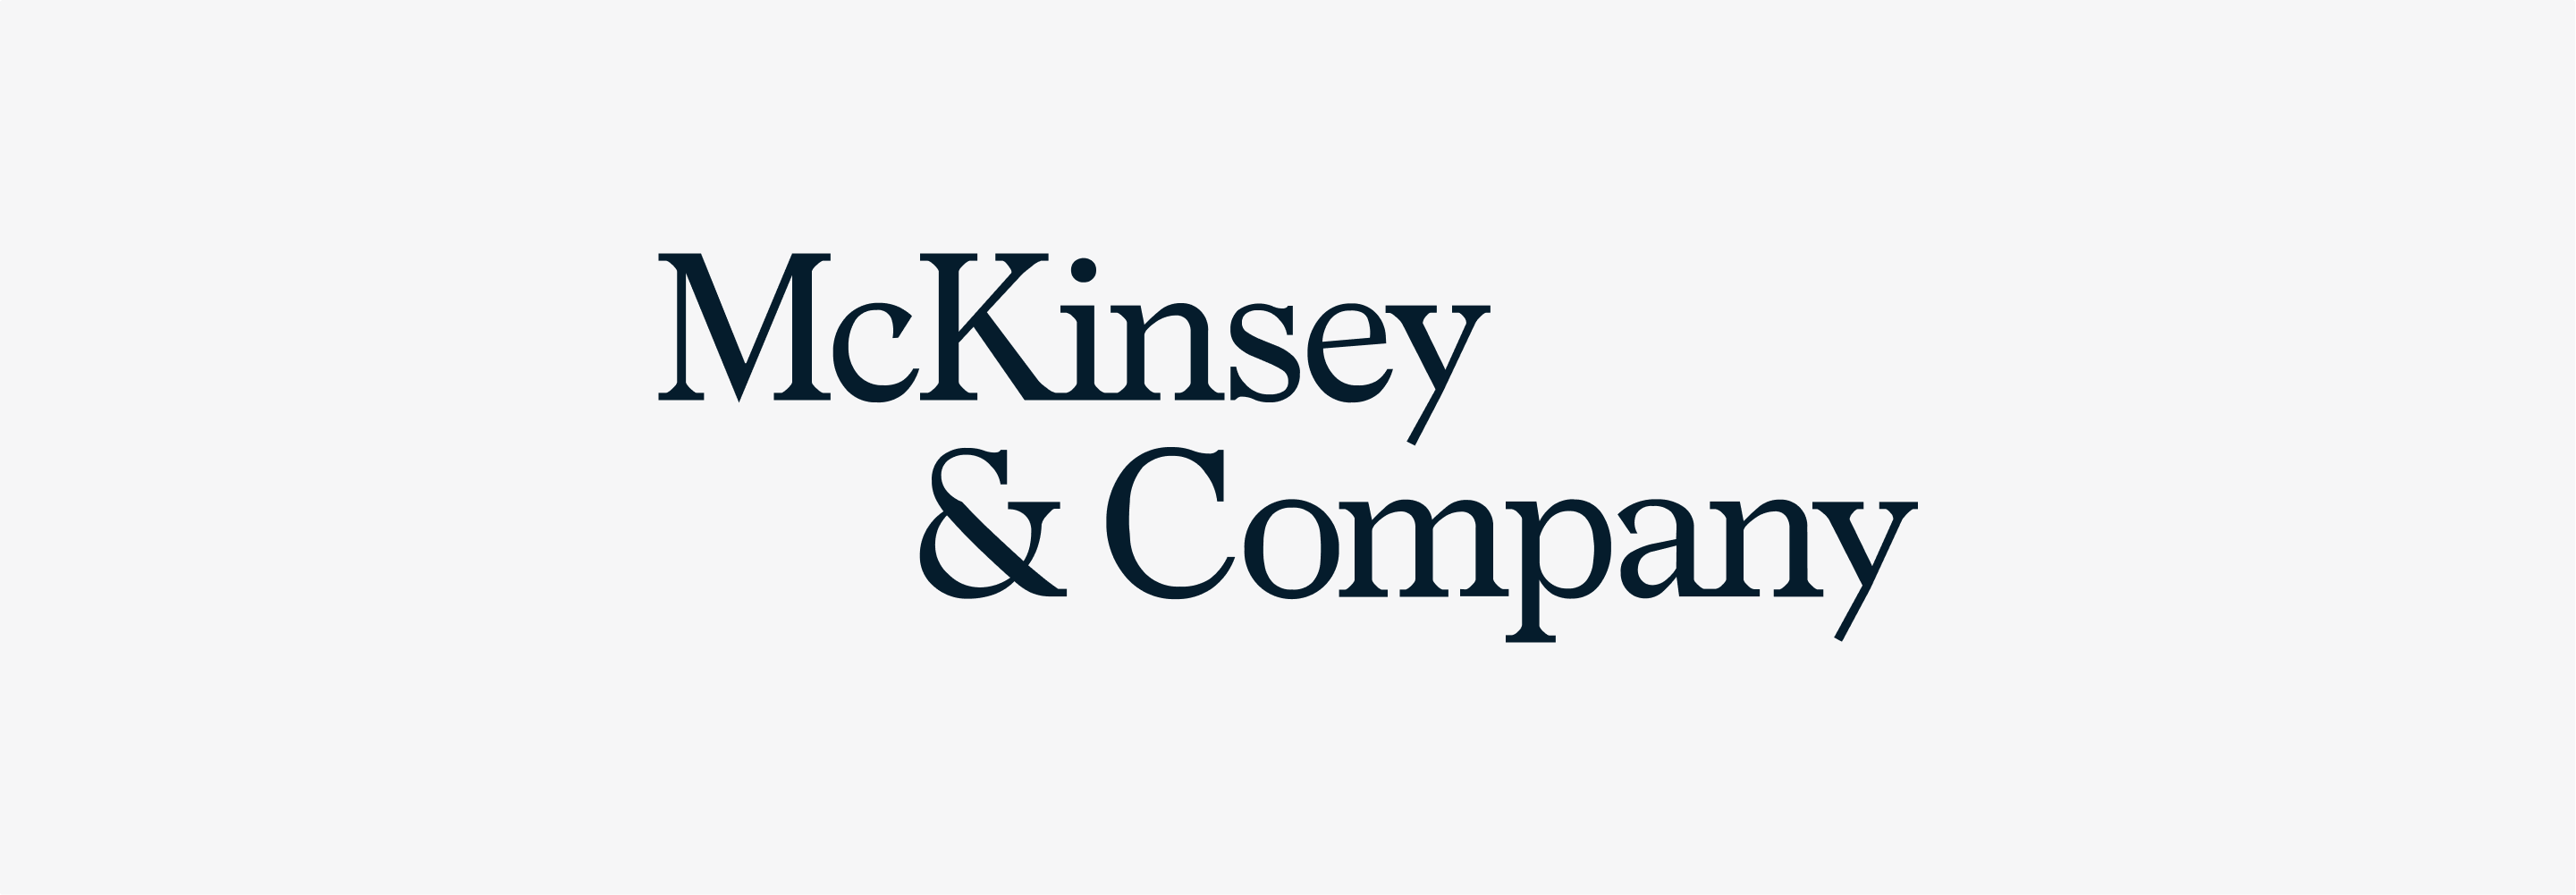 Supplier Discovery: McKinsey perfectly describes why we exist